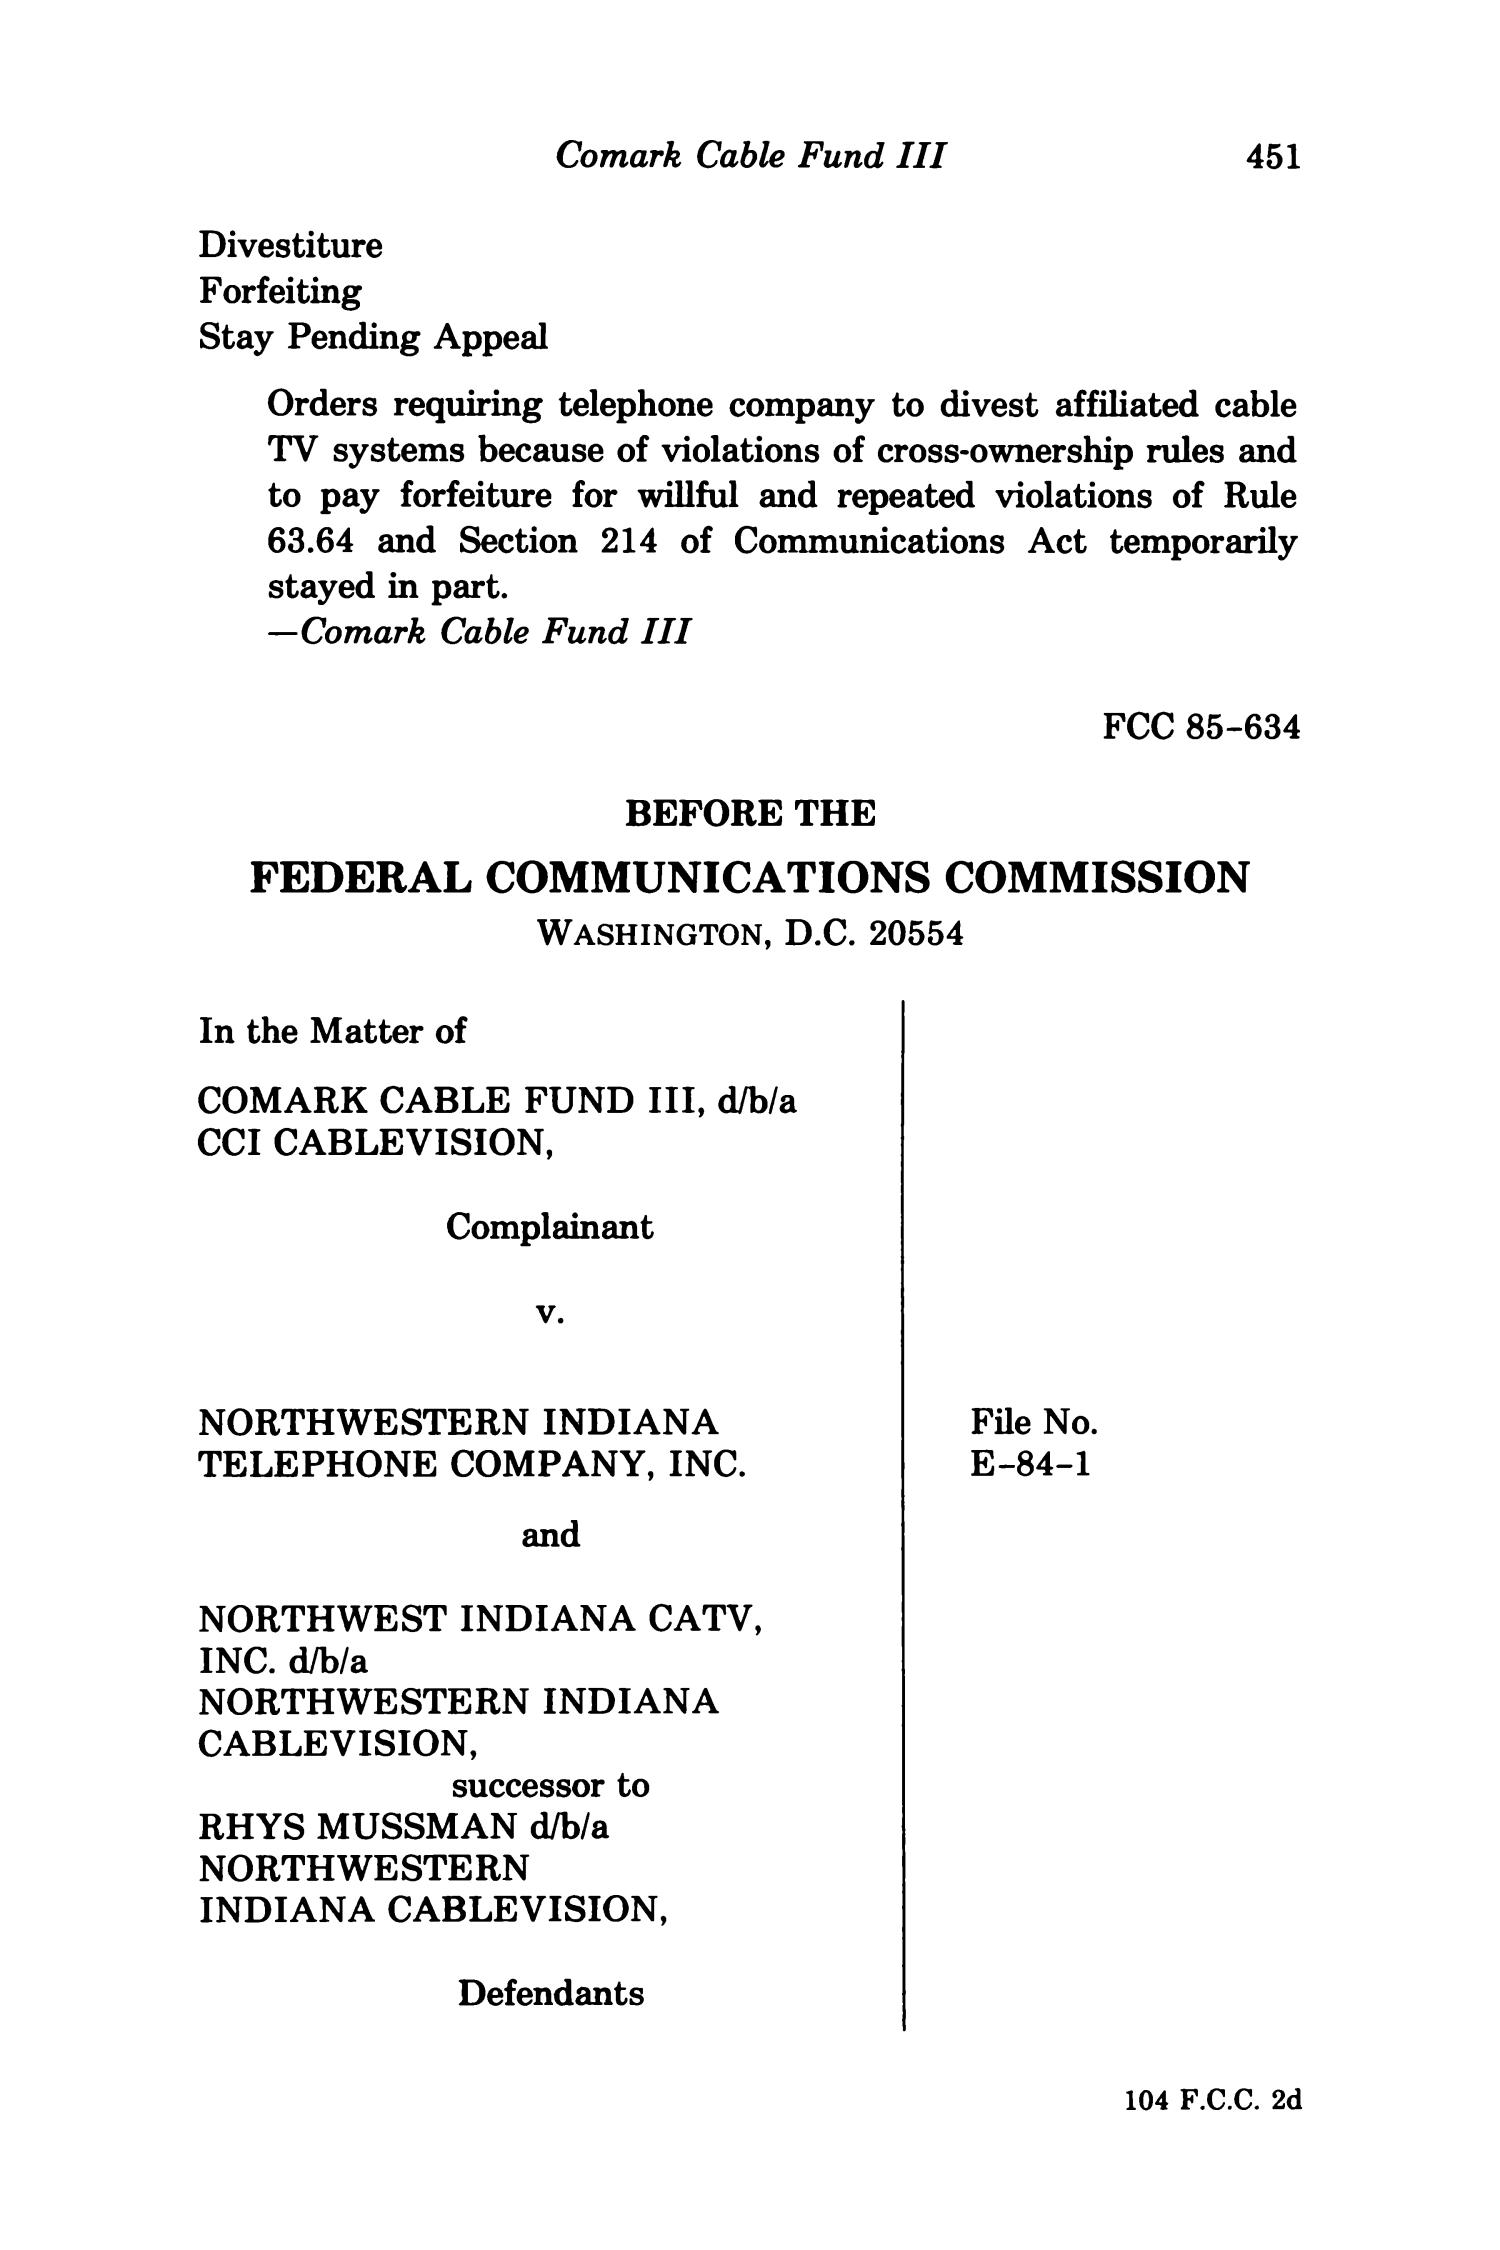 FCC Reports, Second Series, Volume 104, Number 2, Pages 375 to 719, August 1986
                                                
                                                    451
                                                